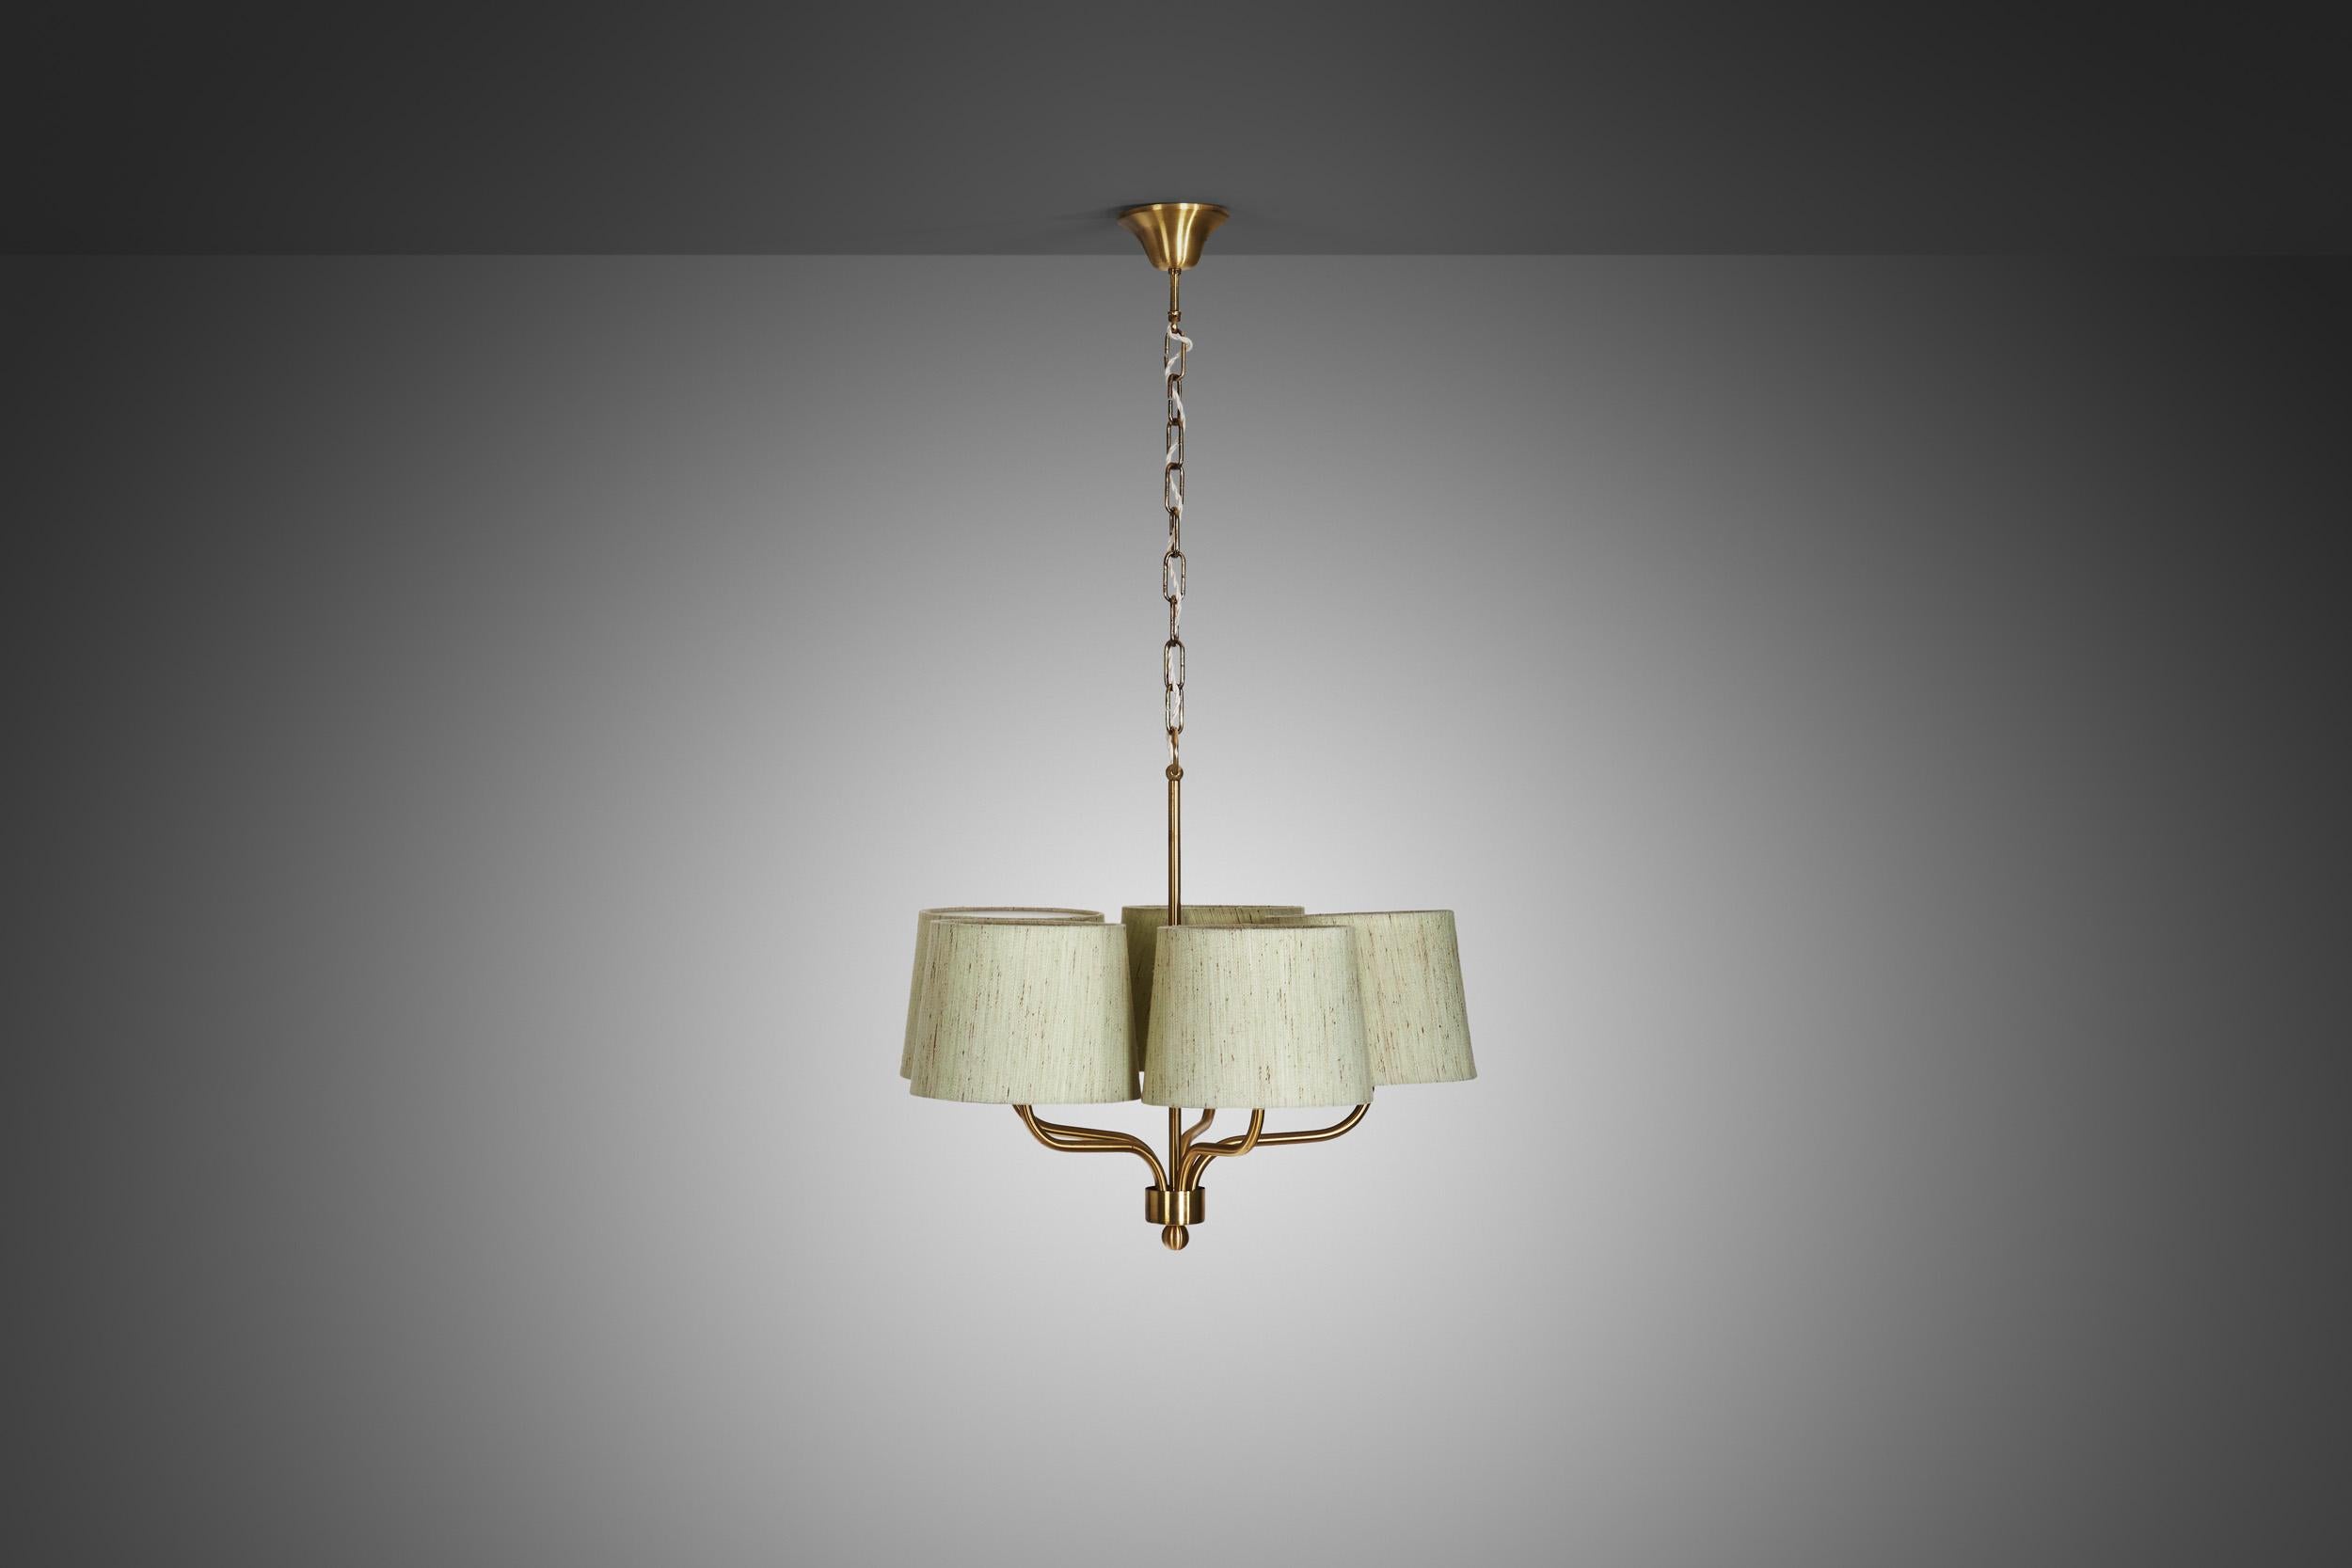 Mid-Century Modern Five Arm Brass Ceiling Lamp with Fabric Shades by Luxus Vittsjö, Sweden 1960s For Sale